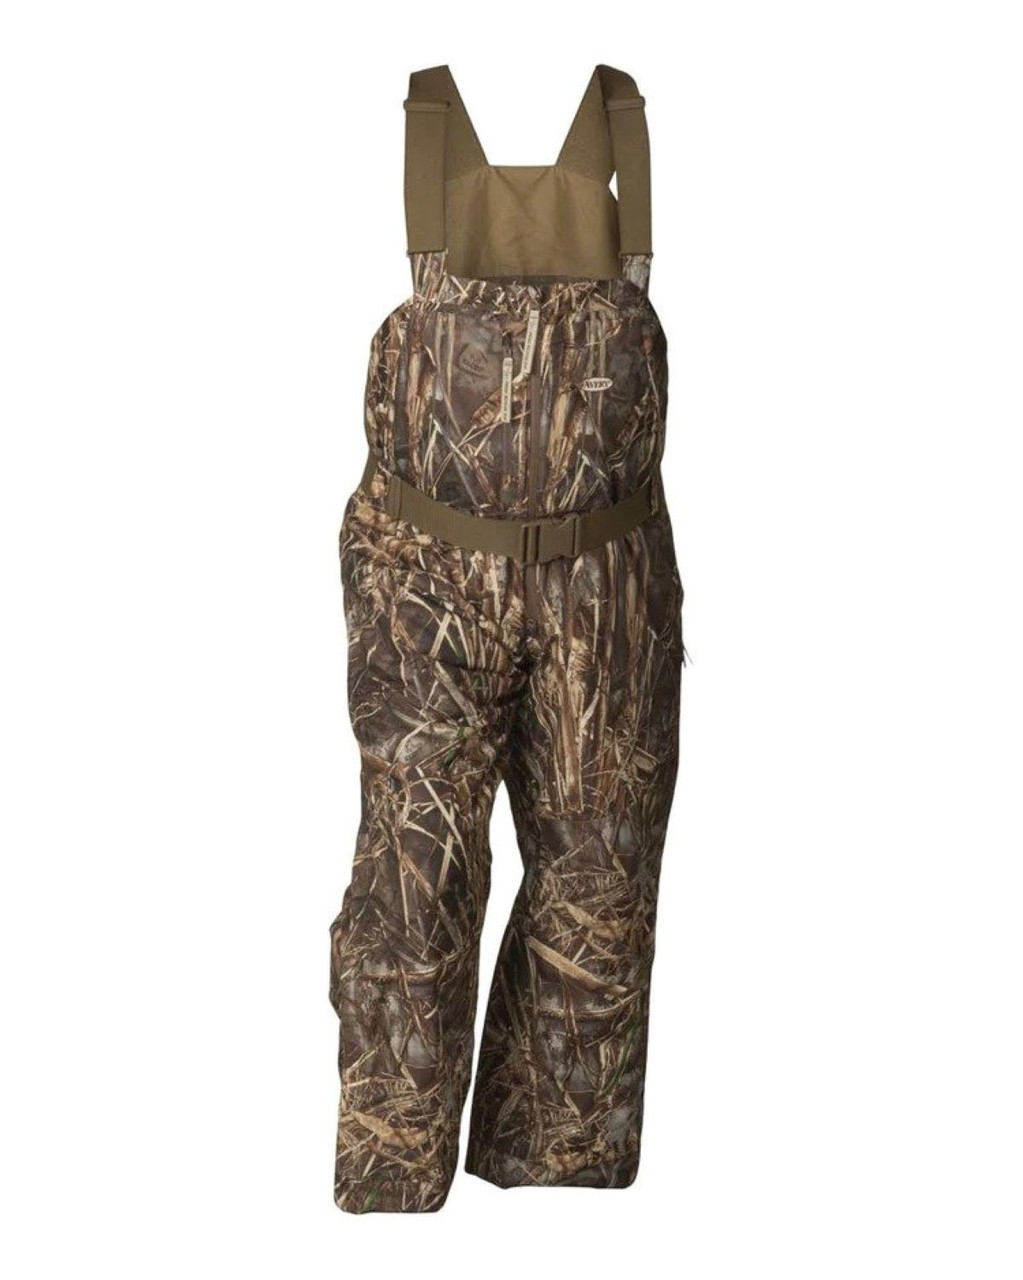 Banded Avery Originals Insulated Field Bib - Realtree Max-7 - 2X-Large